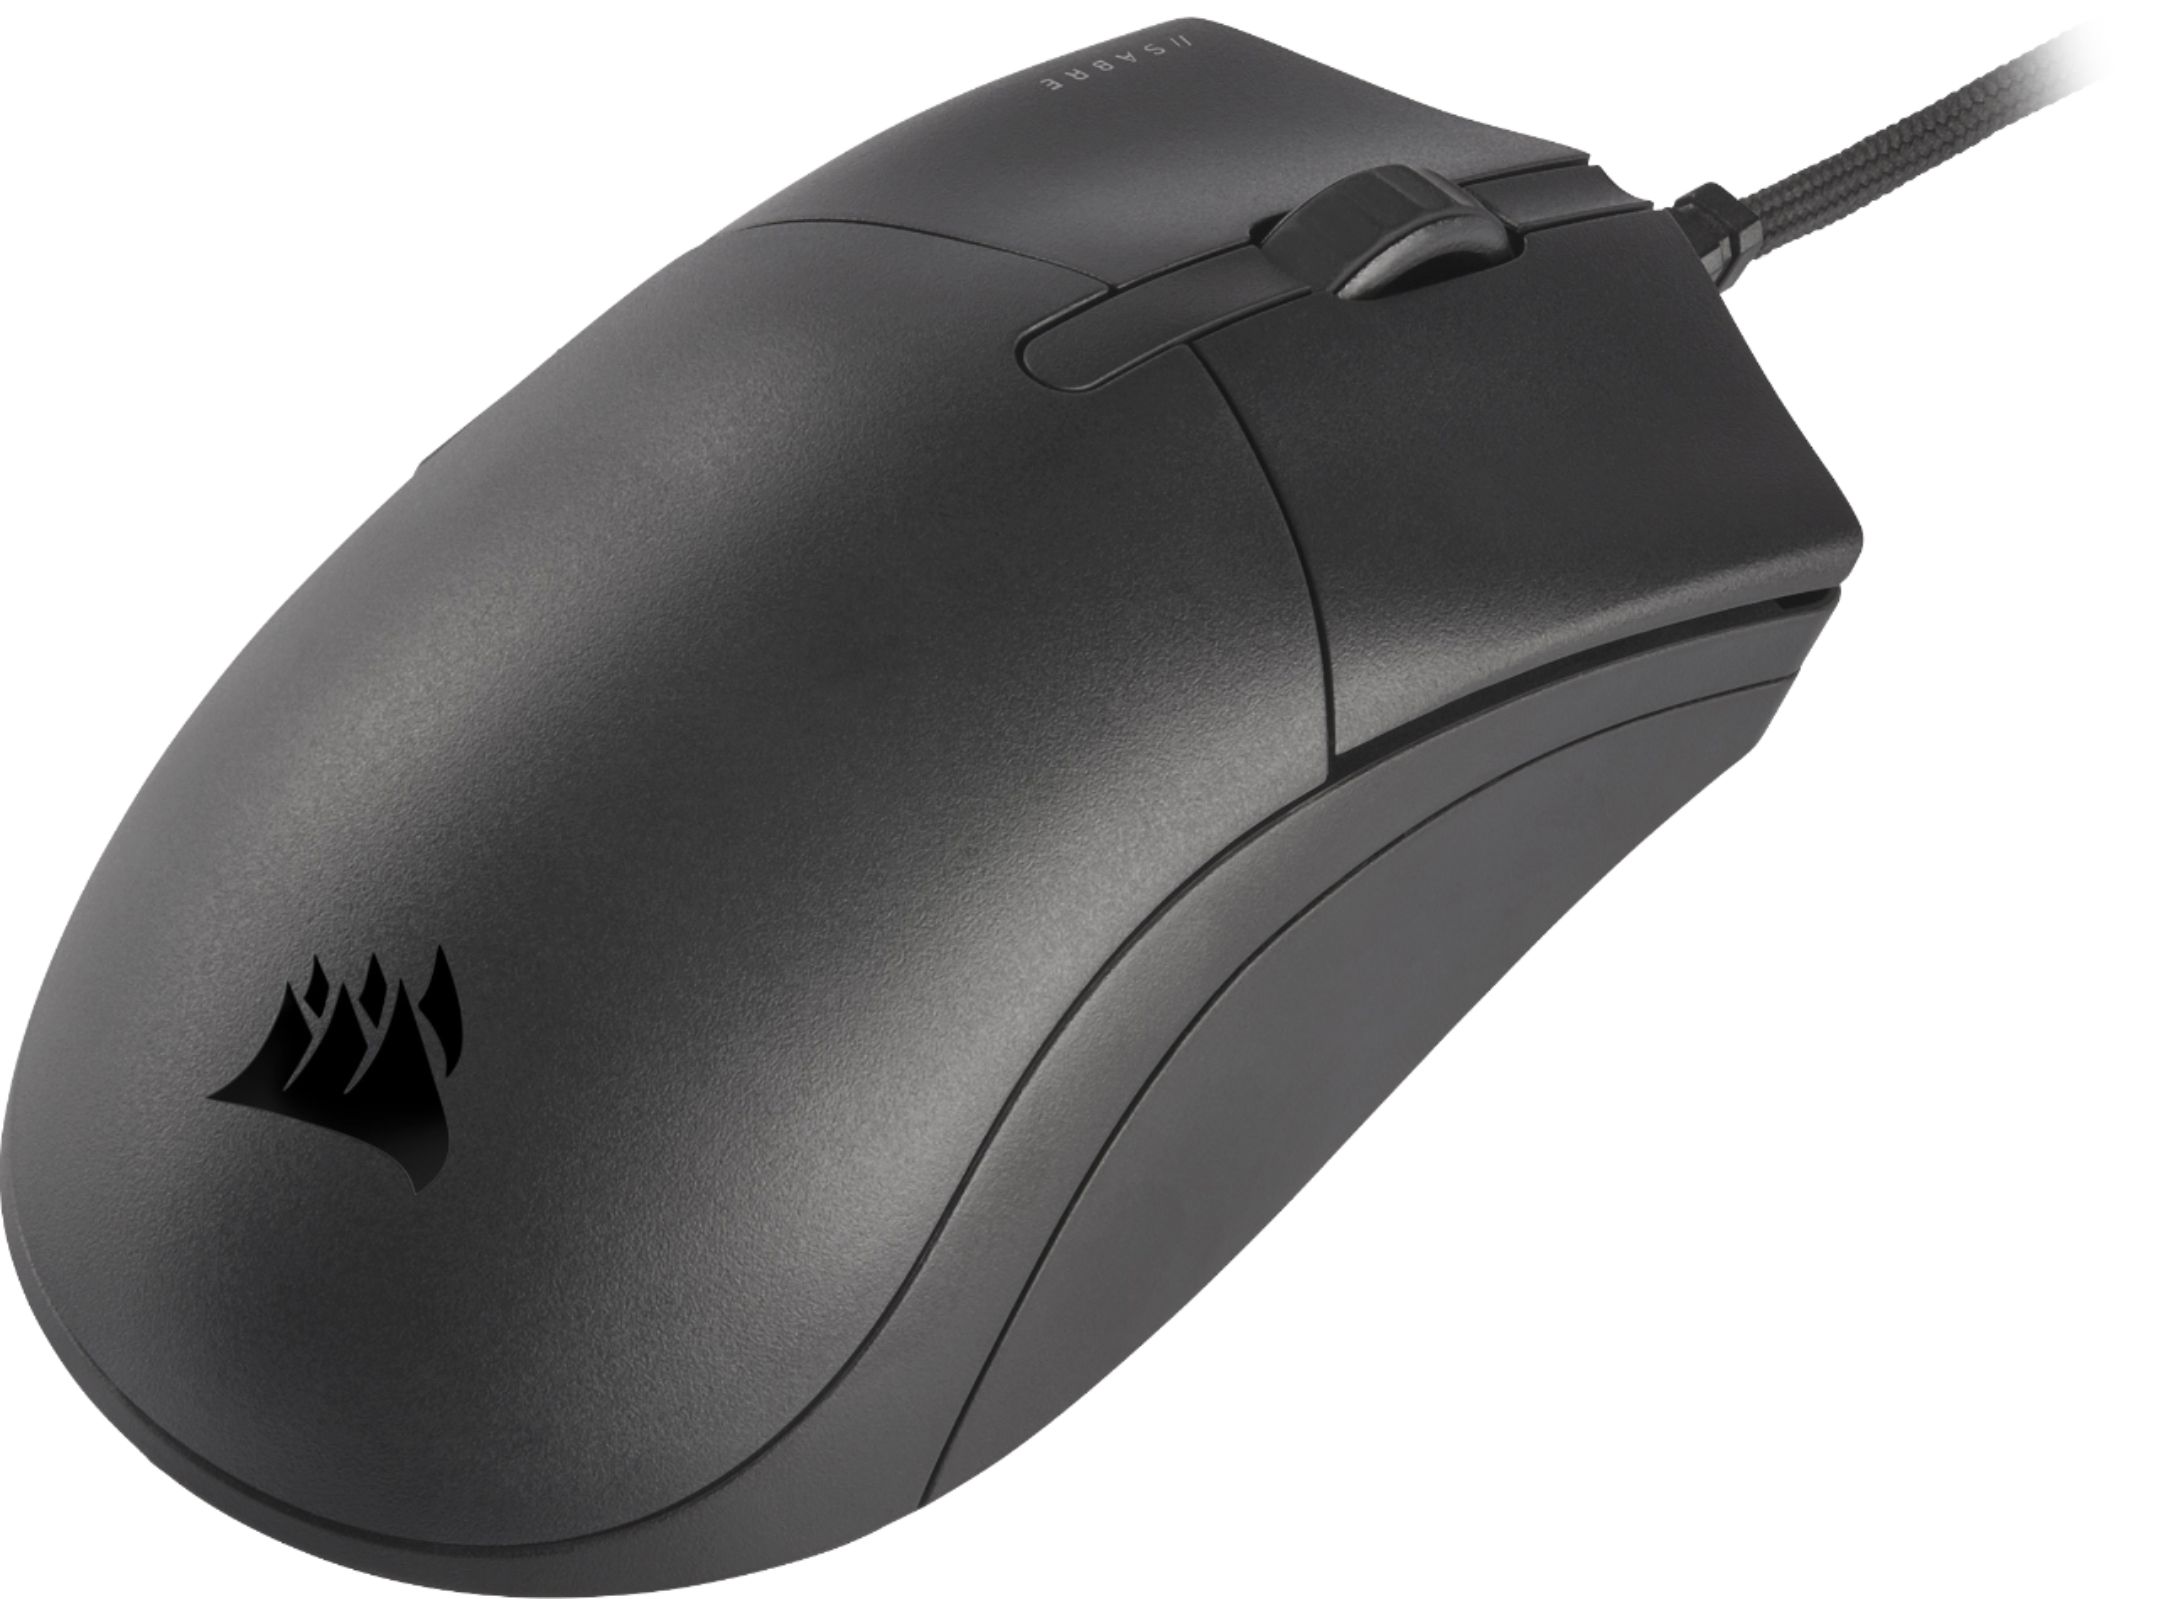 Back View: Arozzi - Favo Light Weight Gaming Mouse - Black